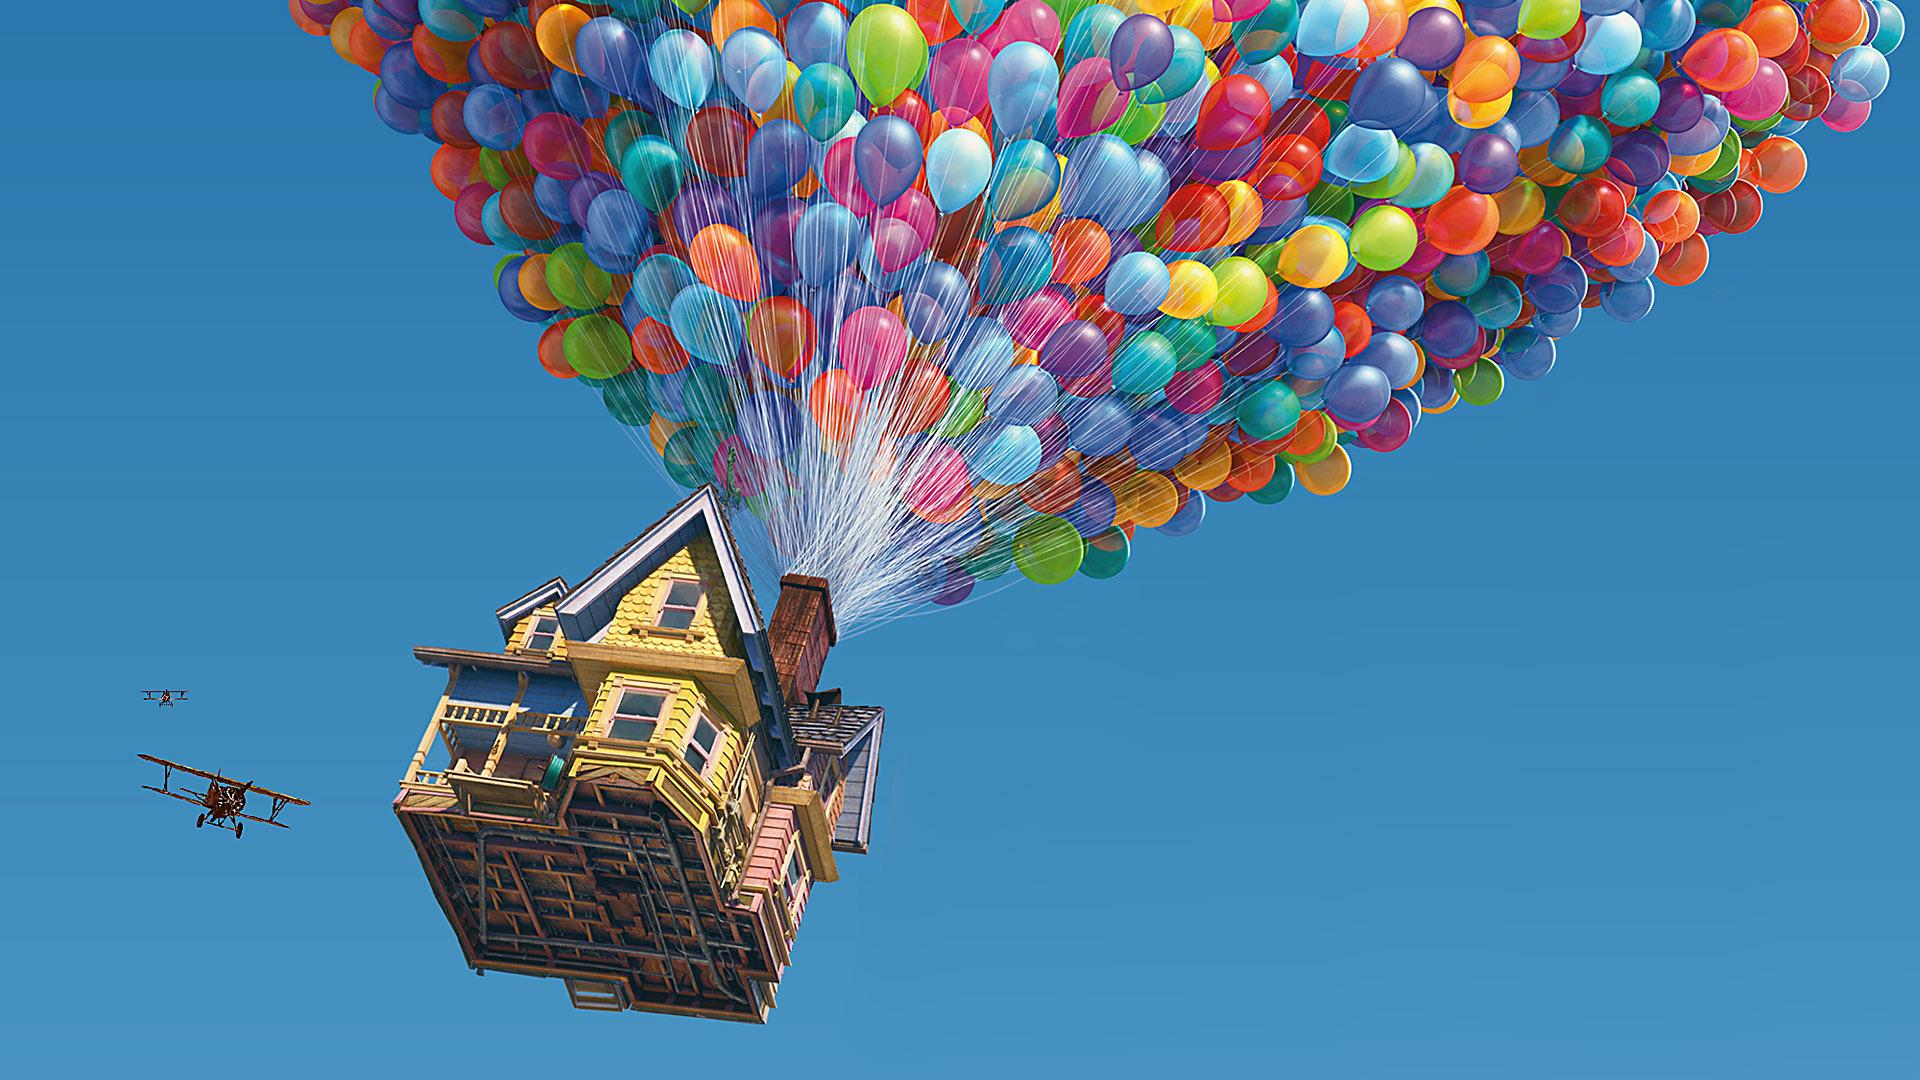 Up movie Wallpaper 1920x1080 Up Movie Balloons